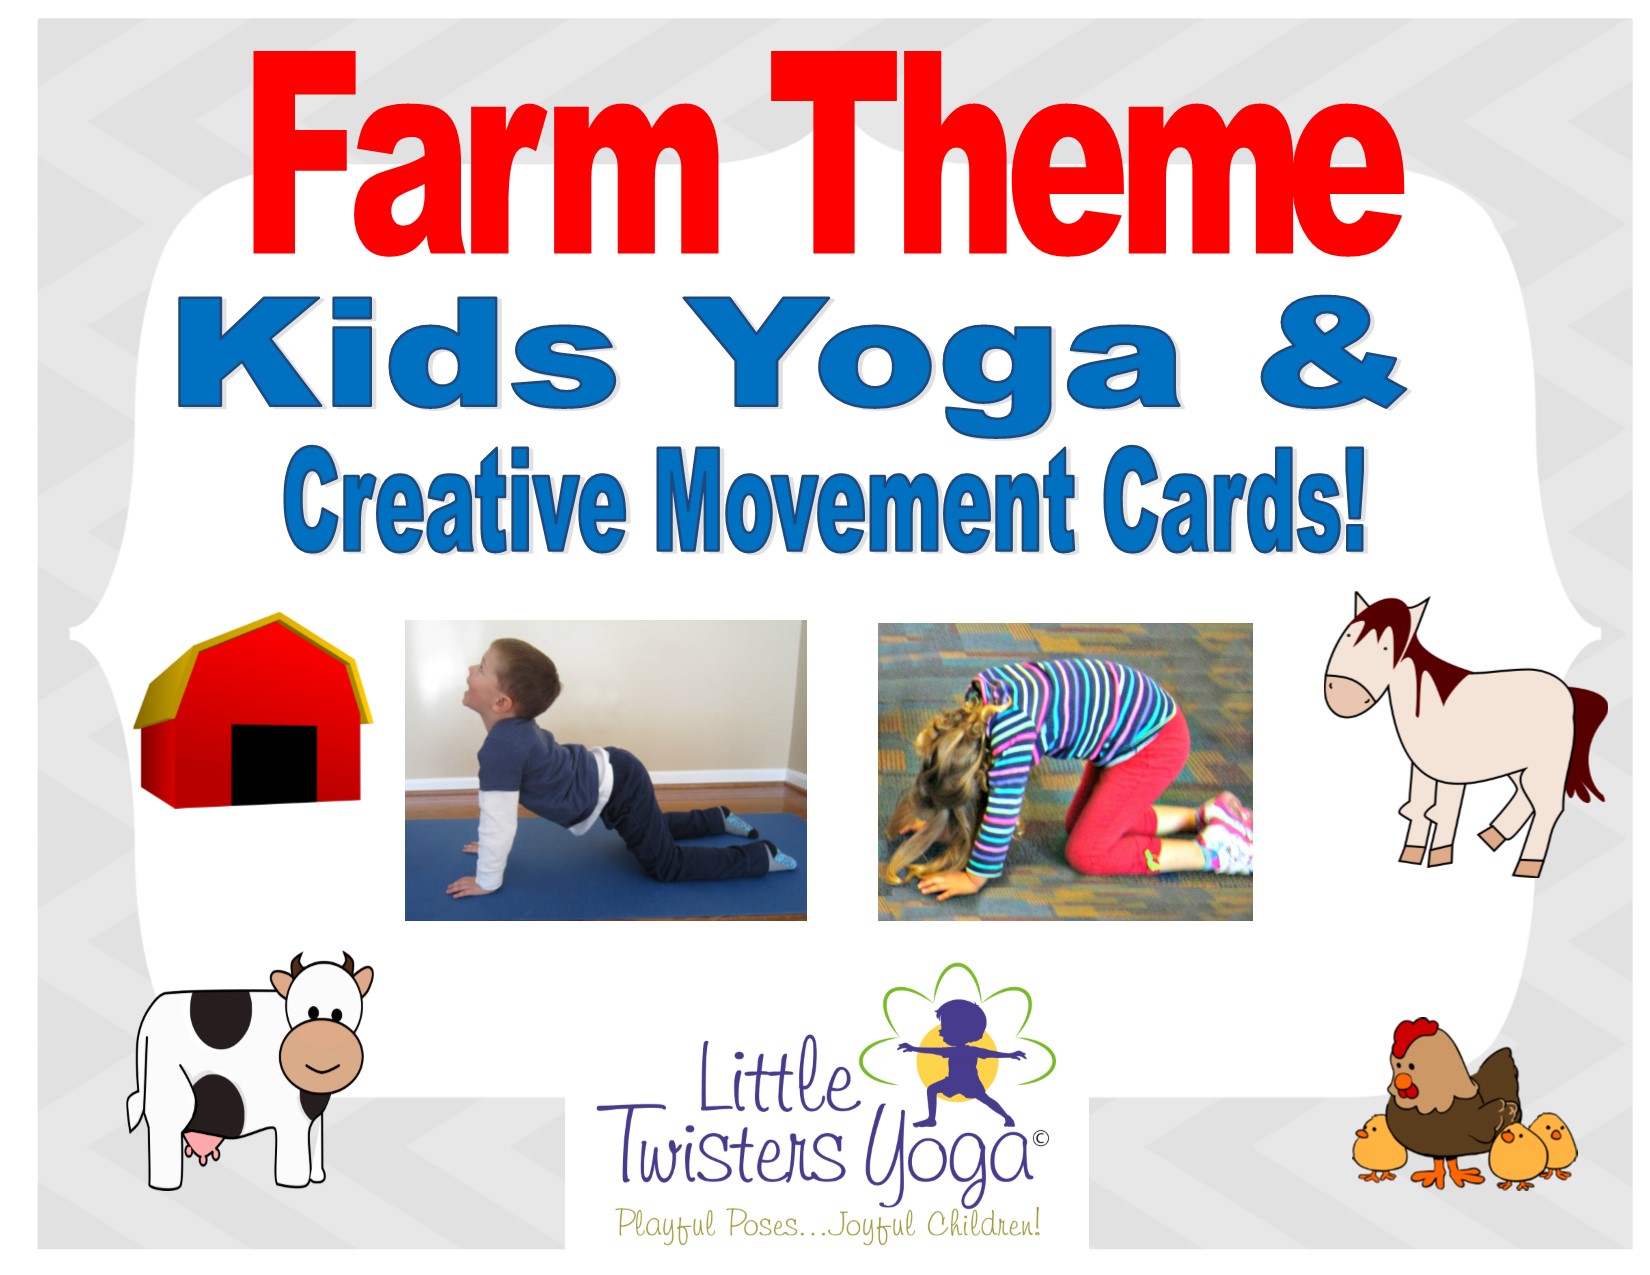 On The Farm | Yoga for Toddlers | Yoga Time! - Cosmic Kids - YouTube